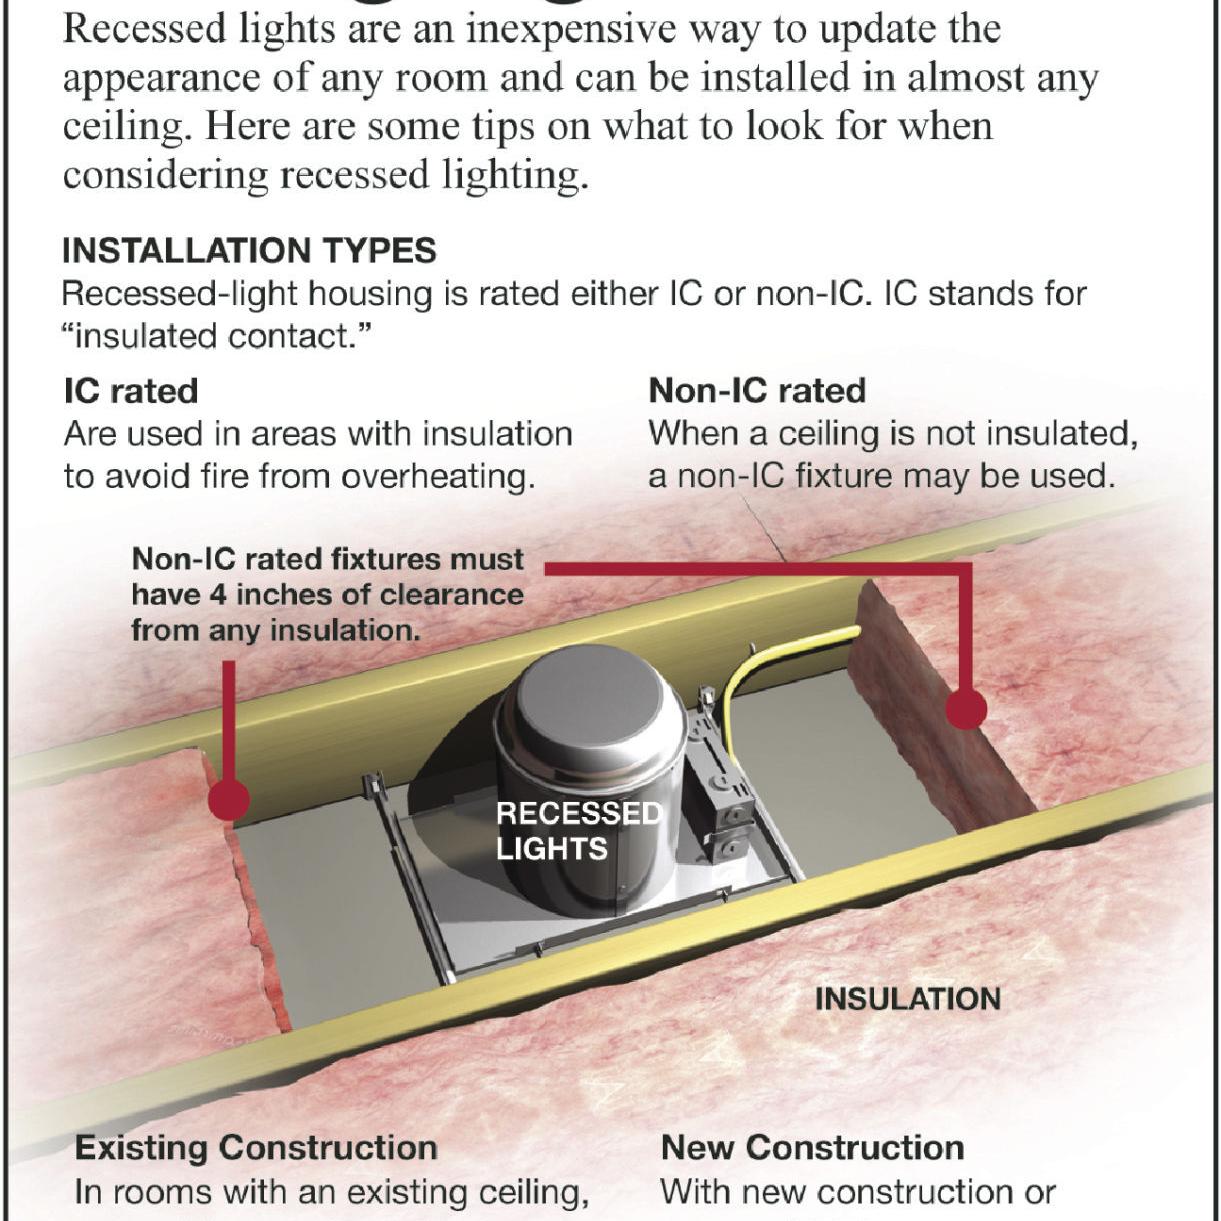 Install recessed lighting in your home office | Siouxland Homes |  siouxcityjournal.com